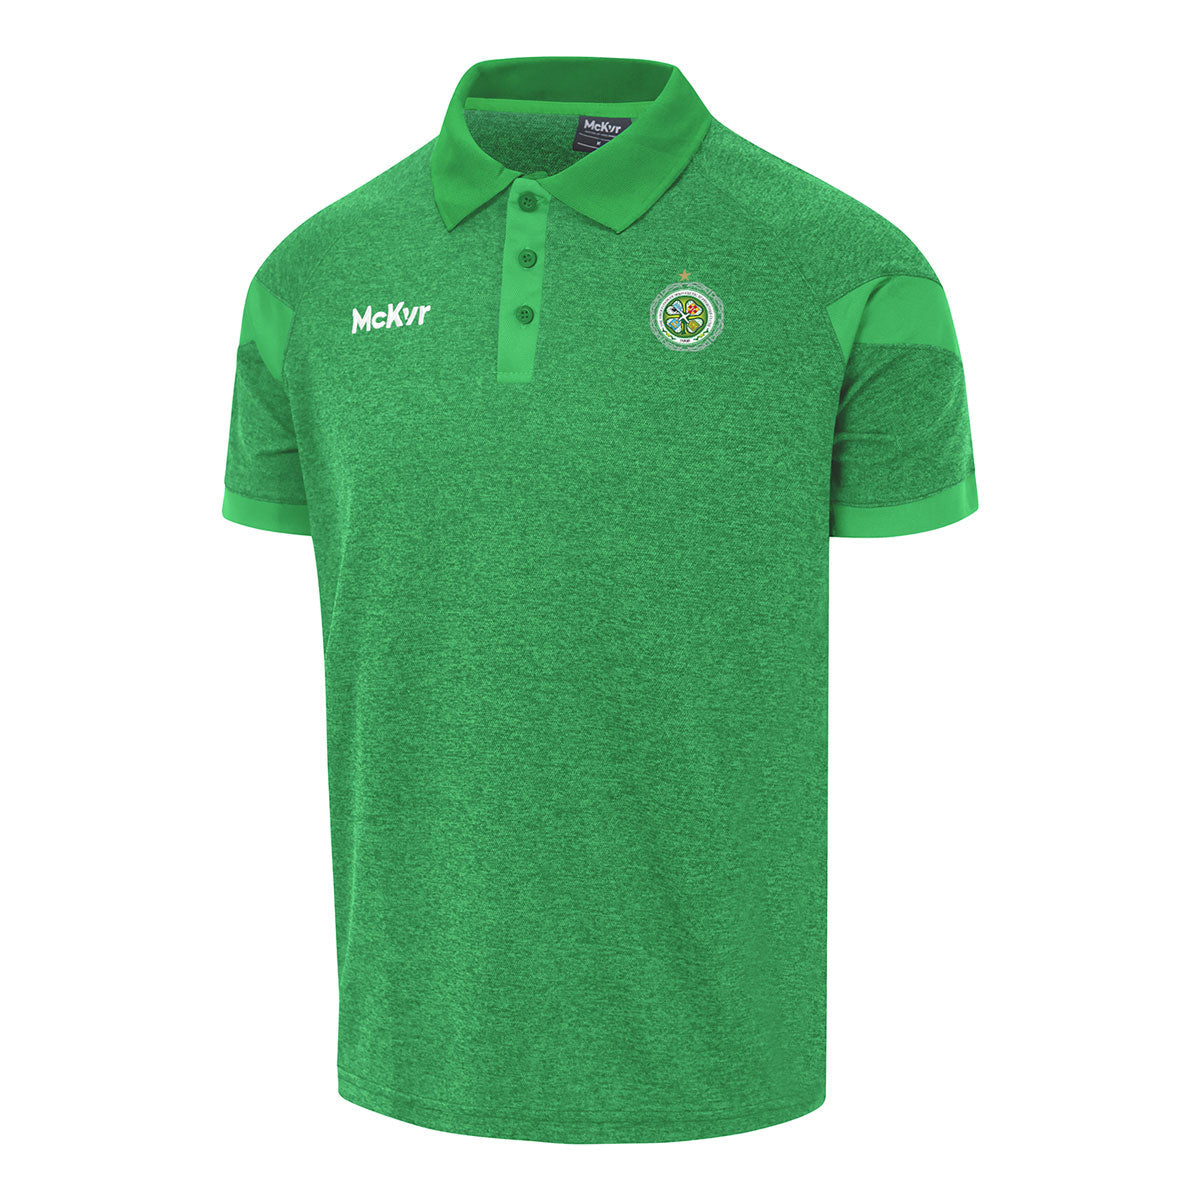 Mc Keever The Association of Irish Celtic Supporters Clubs Core 22 Polo Top - Adult - Green